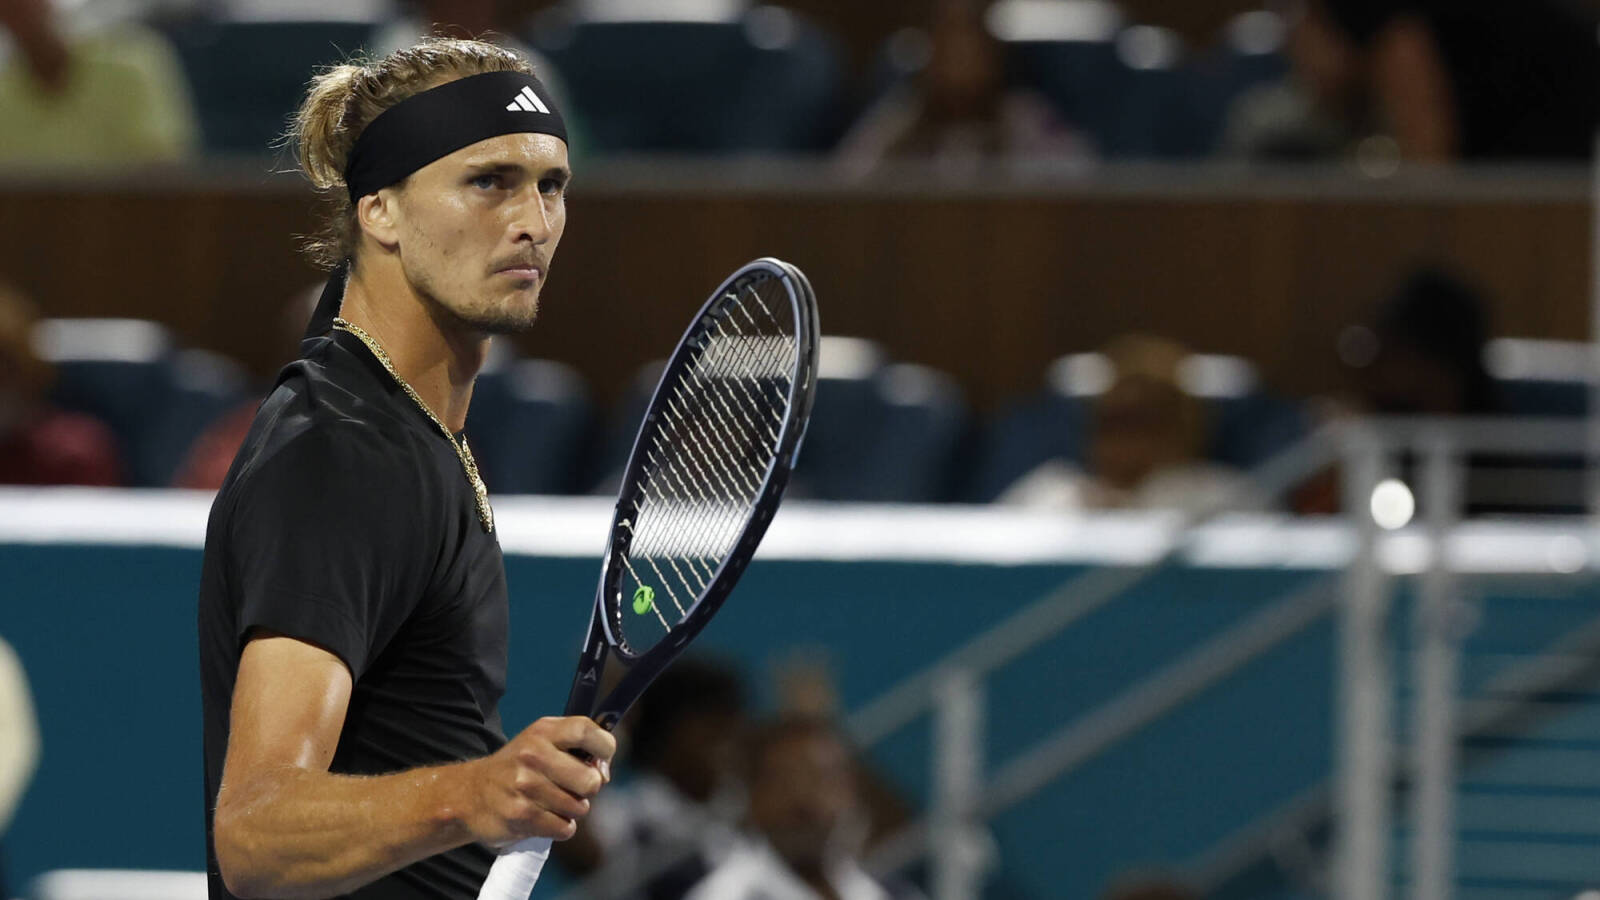 'We are the only sport in this situation,' Alexander Zverev lashes out at ATP for tight schedules as players get ‘no time to prepare’